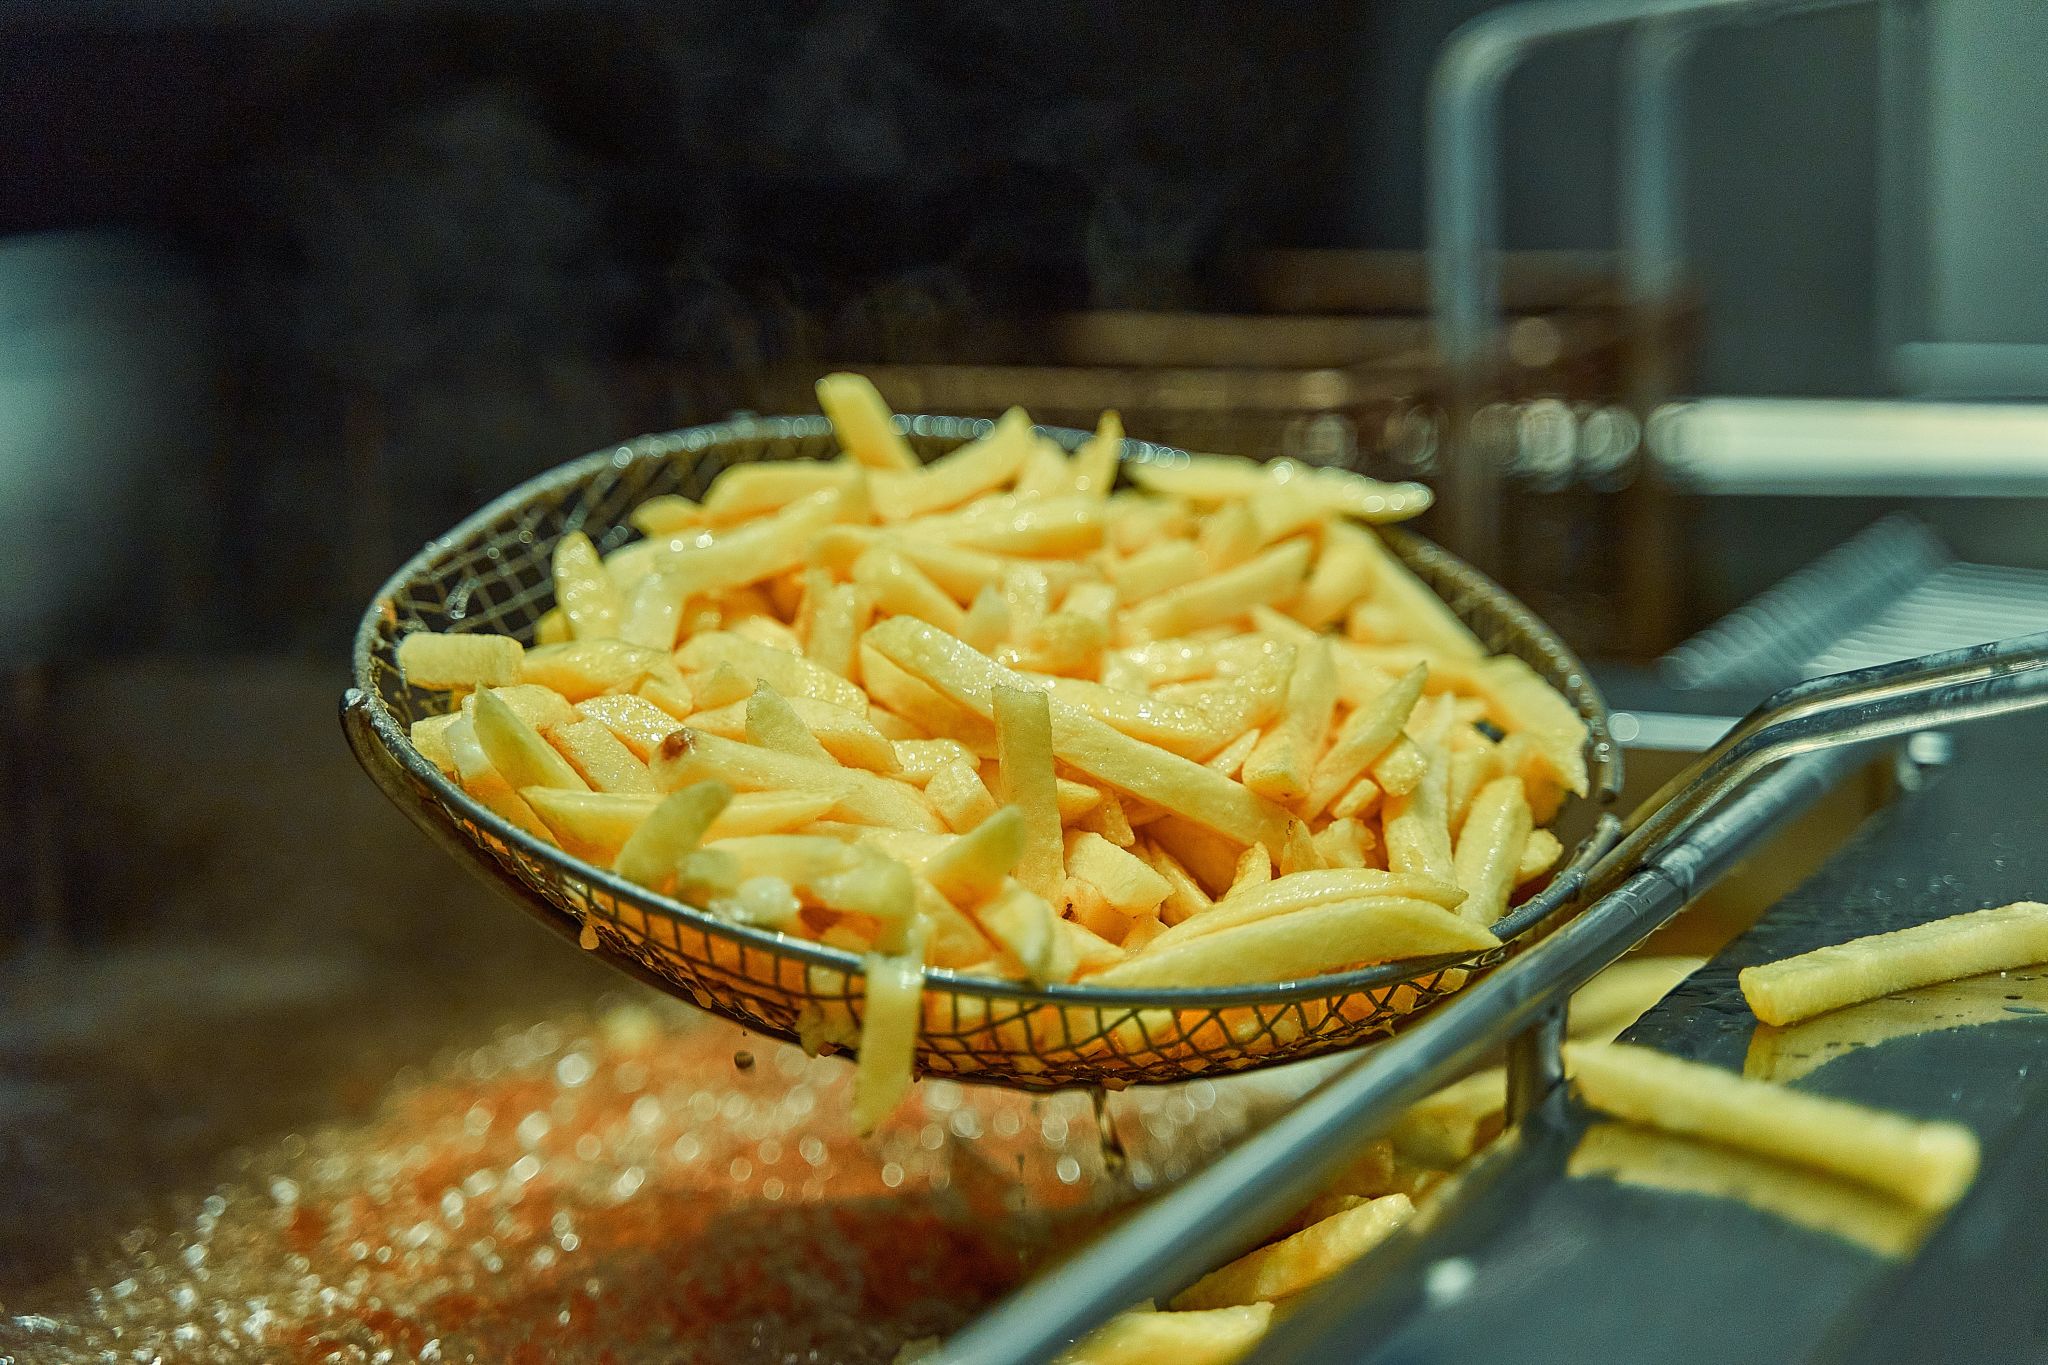 an image of fries